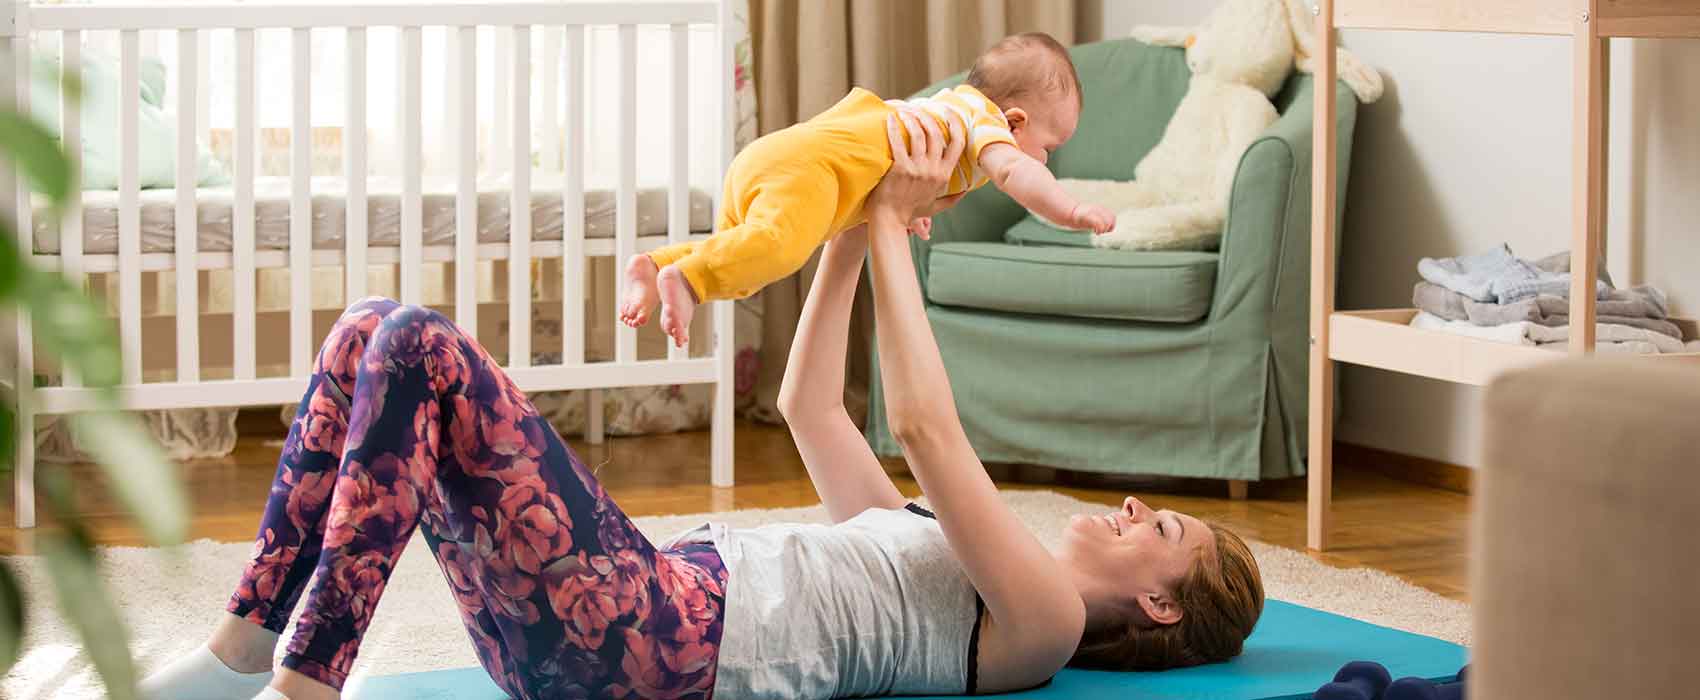 https://breastpumps.byramhealthcare.com/-/media/blogs/best-postpartum-workouts-you-can-do-at-home-1700x700.jpg?la=en&h=700&w=1700&hash=B033BCF8253EE18598113A8C08CA4C6A